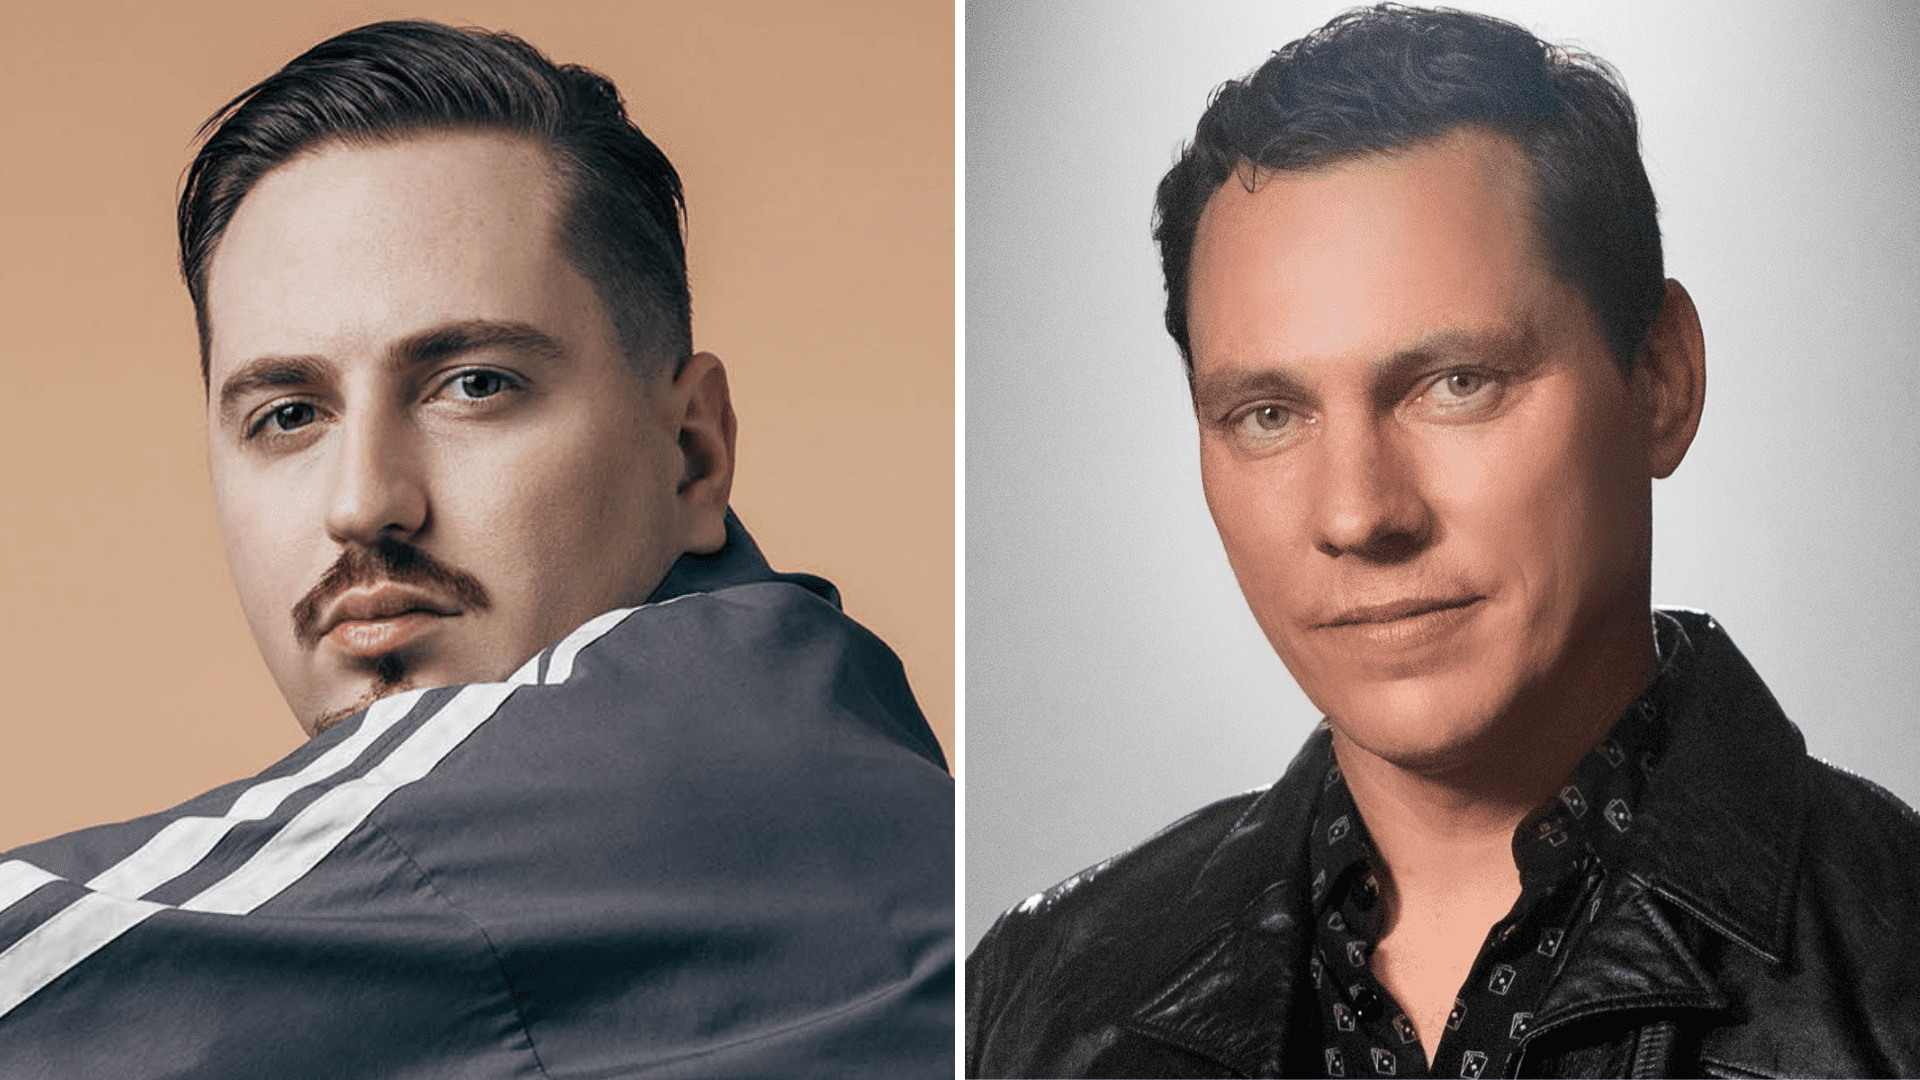 Robin Schulz puts his touch on special remix for Tiësto's ‘The Motto’: Listen